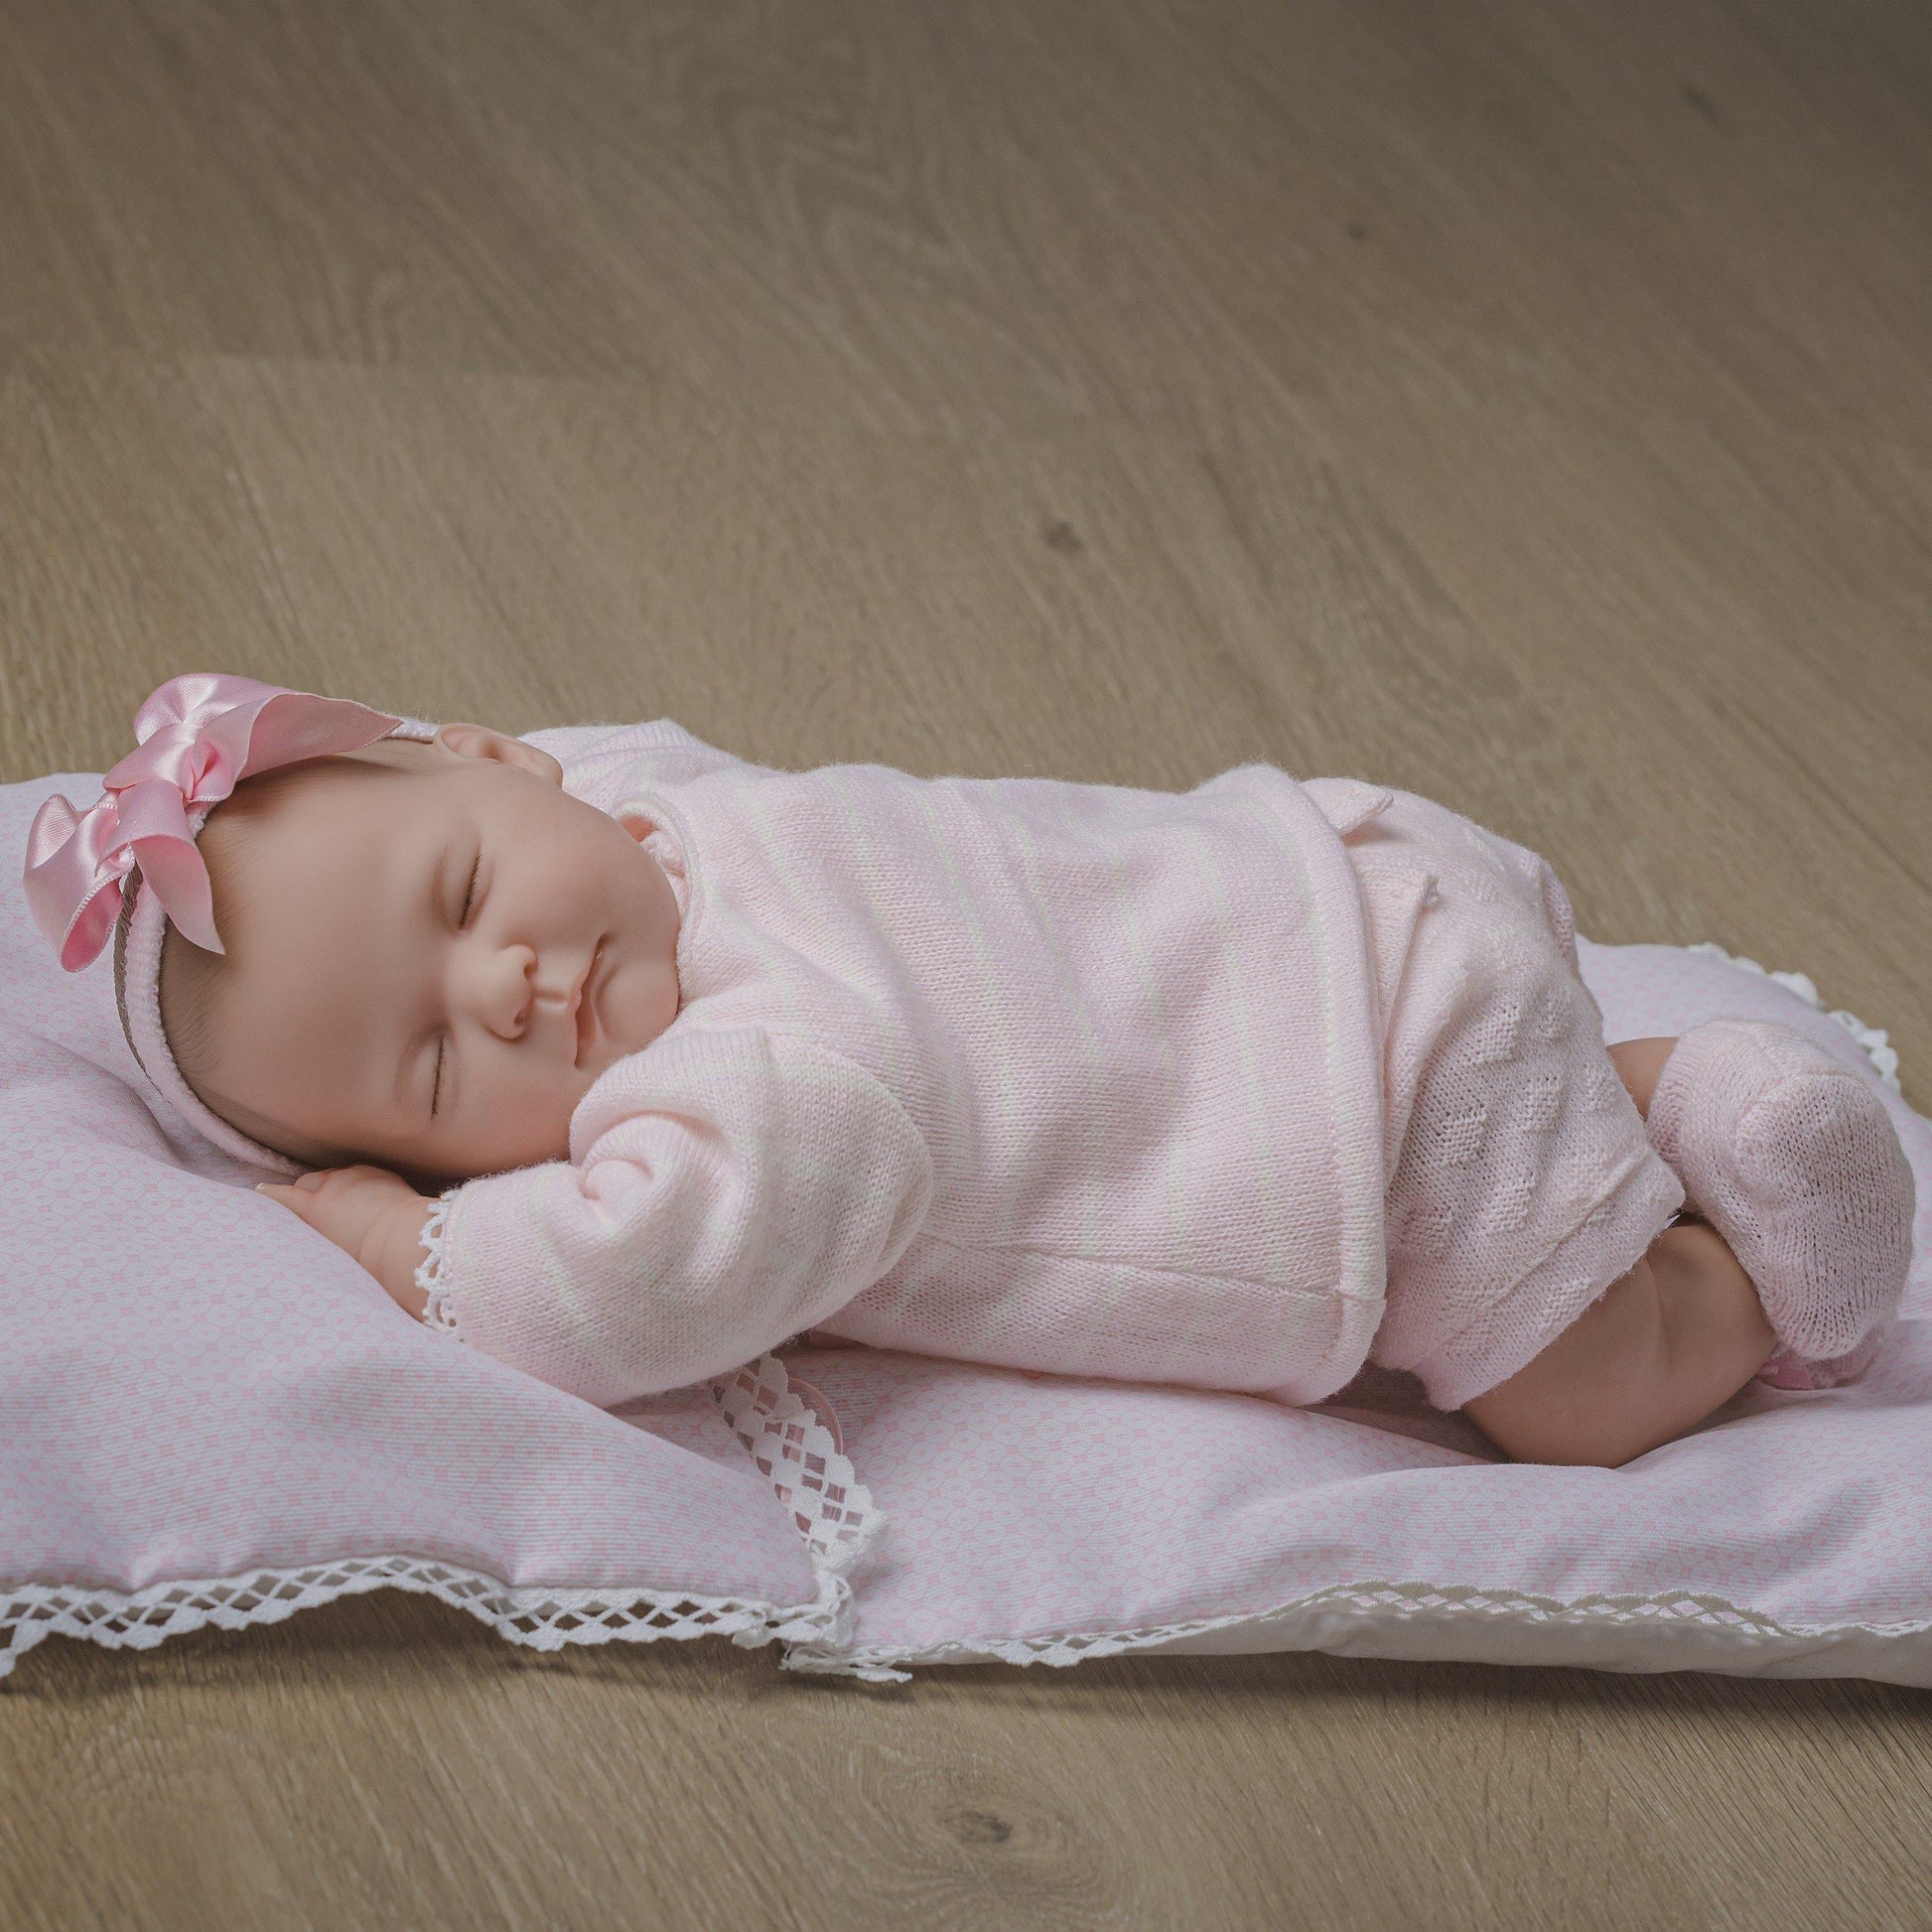 Berenguer Classics 17" Limited Edition "Babylin" - Reborn Baby Doll by JC Toys - JC Toys Group Inc.